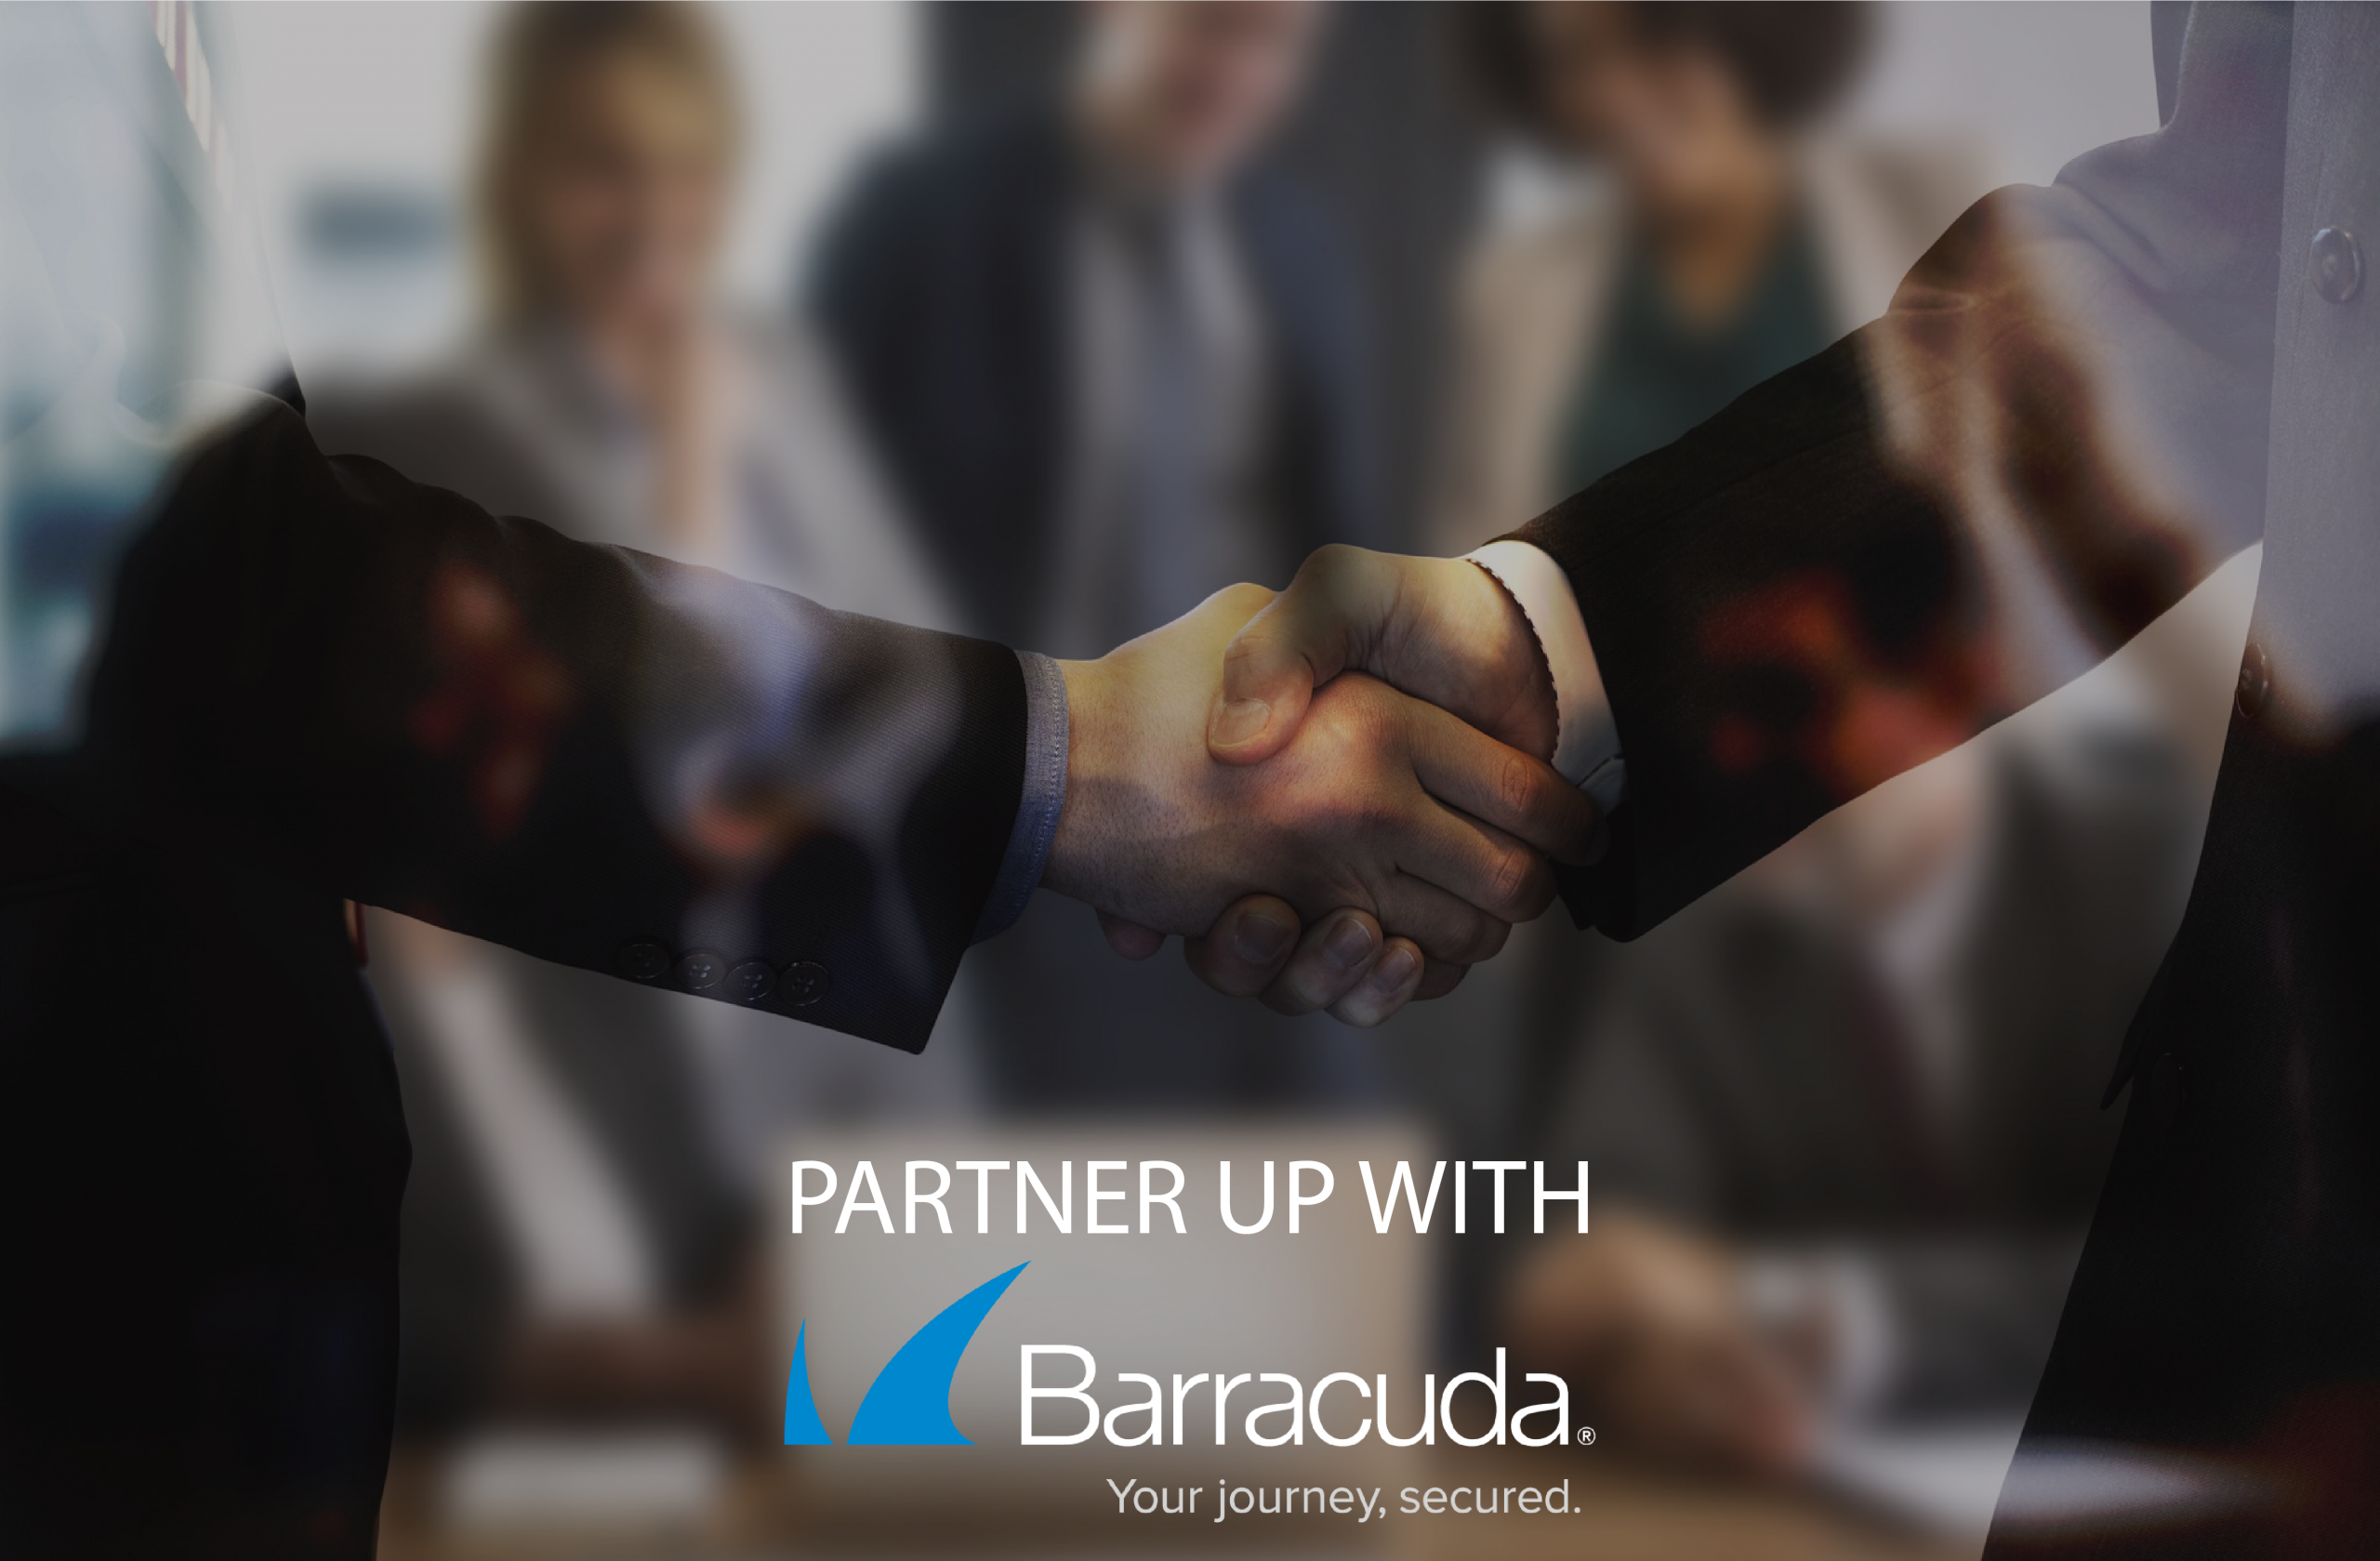 Partner up with Barracuda